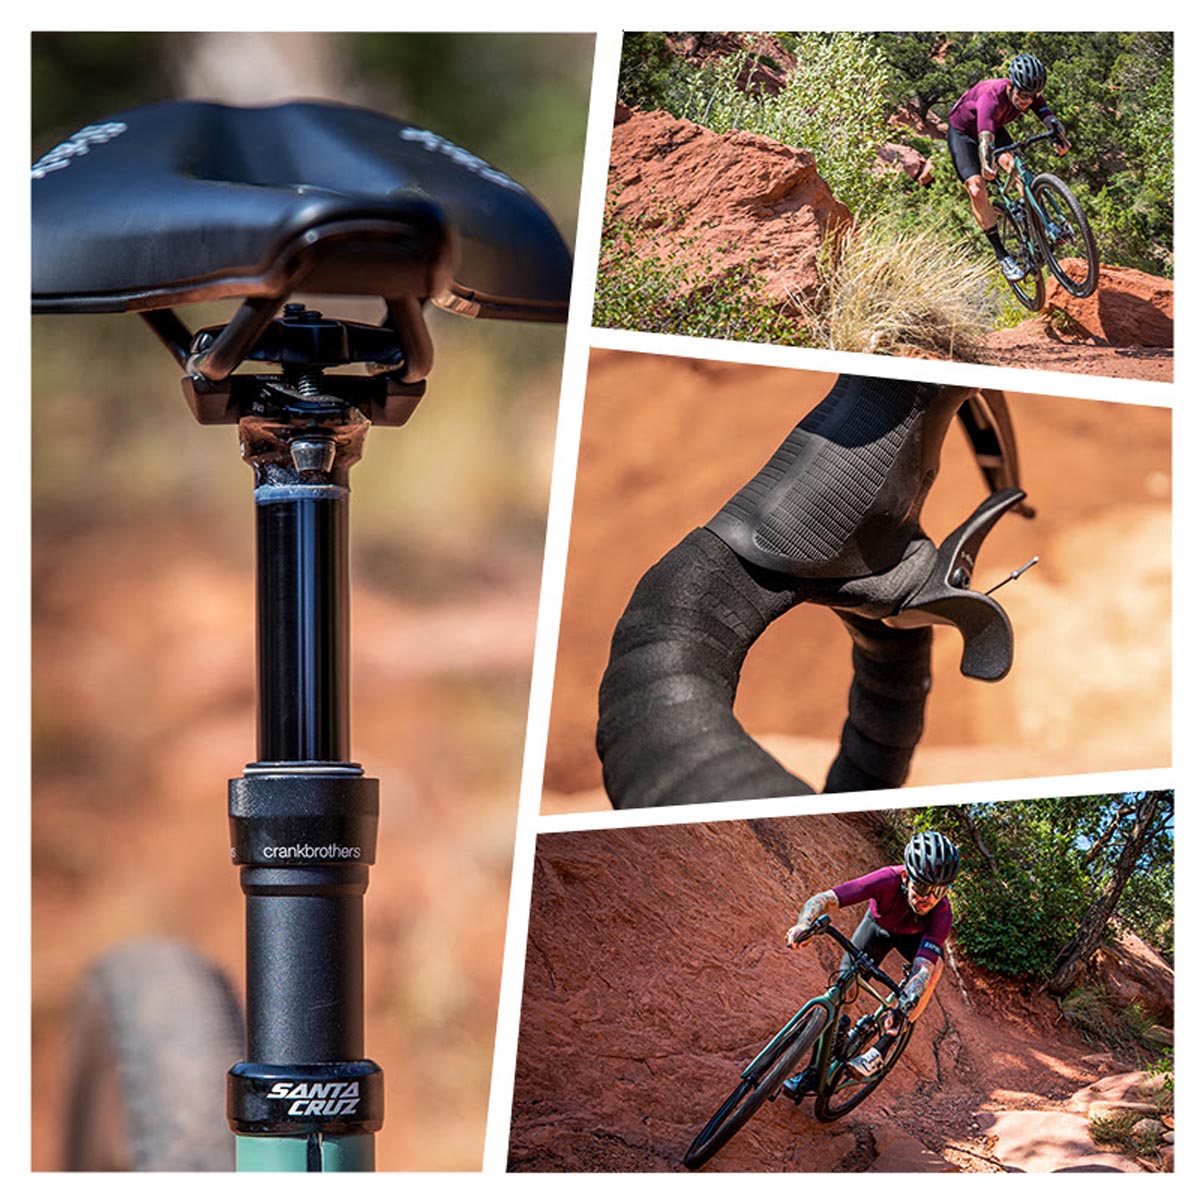 Crankbrothers Highline XC / Gravel dropper post two way remote collage